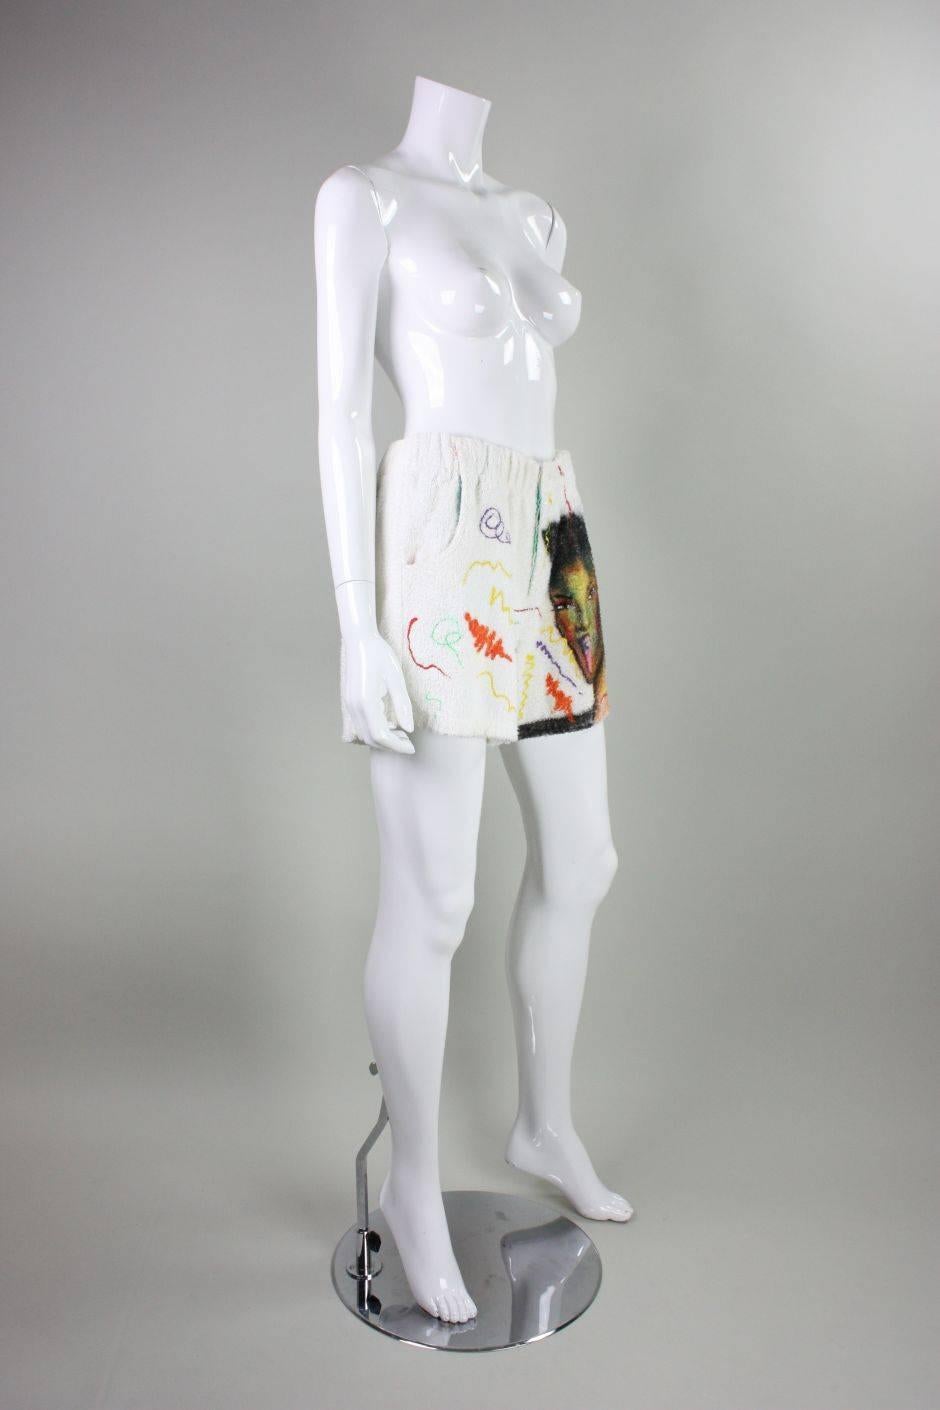 Vintage art to wear shorts date to the 1980's and are made of white terrycloth.  Shorts feature a portrait of Grace Jones painted on the left front leg with puffy paint accents.  Shorts have a Maui and Sons label inside and a 